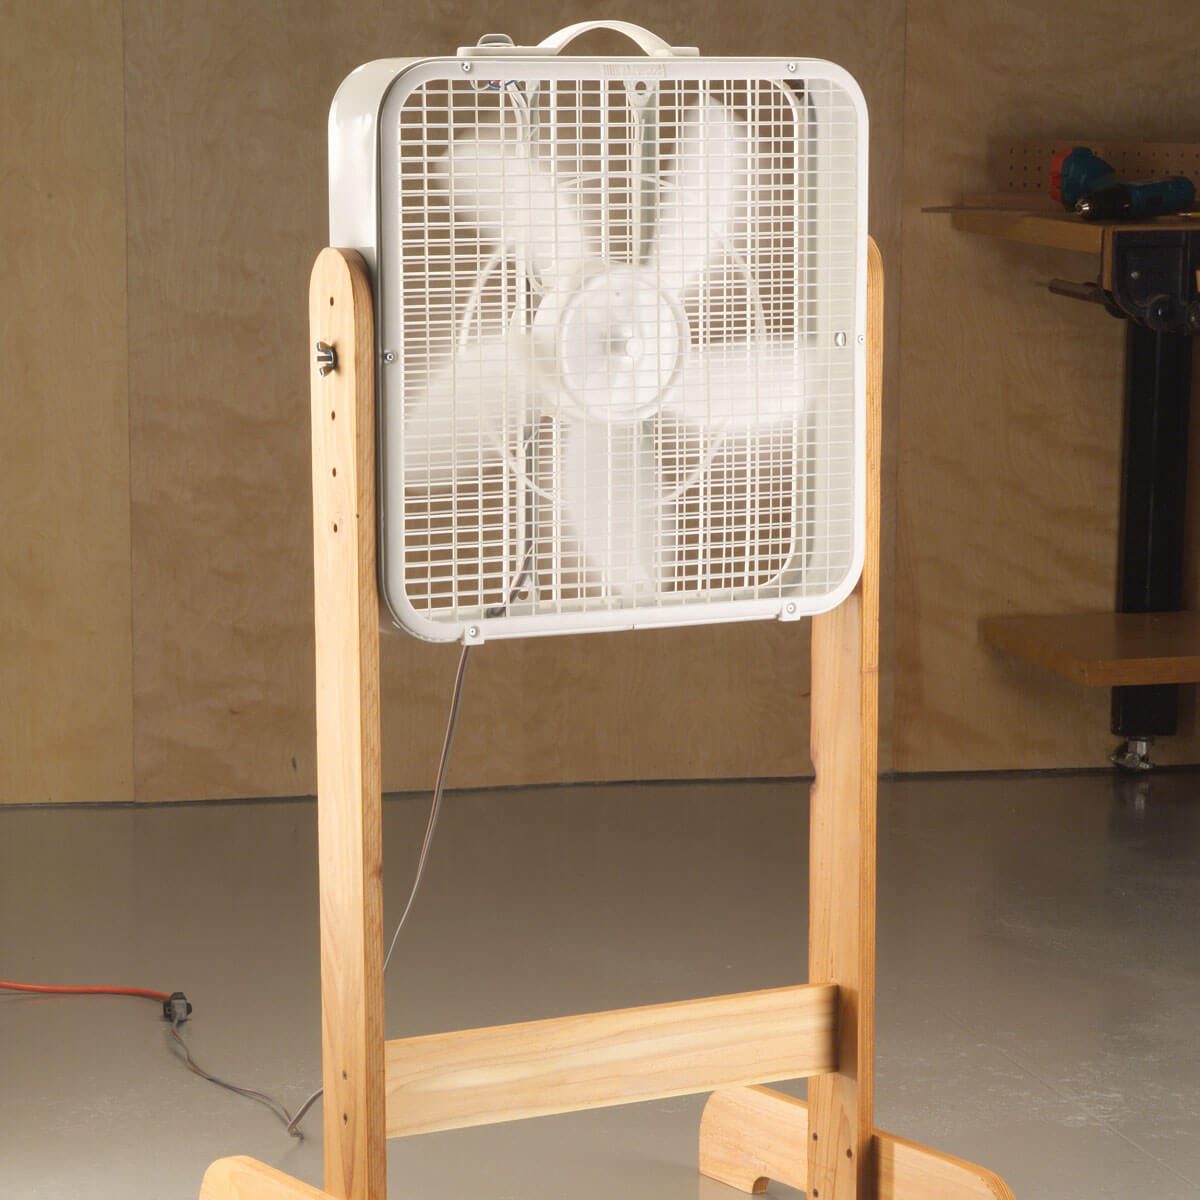 Box Seats for Box Fans — Workshop Tip from The Family Handyman